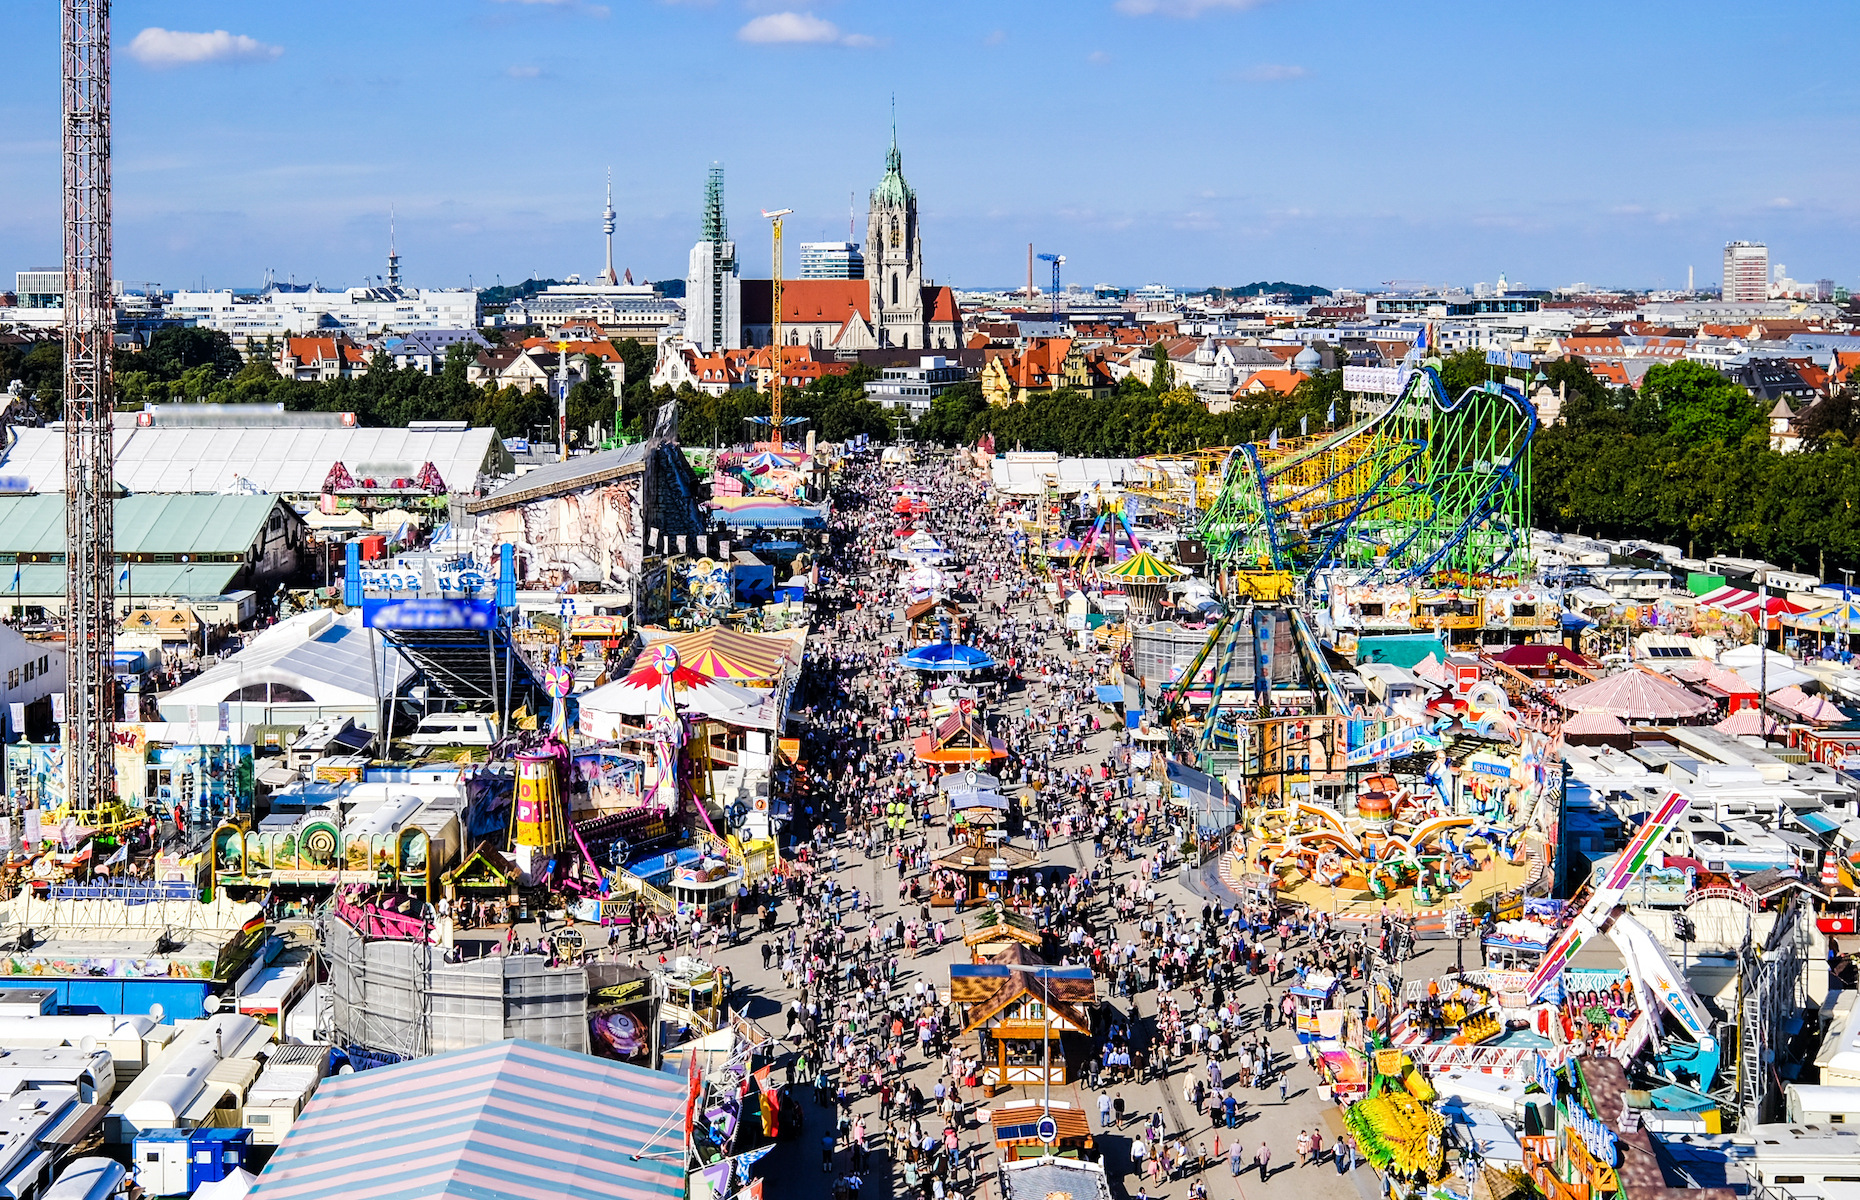 <p>Forget the rinky-dink Oktoberfest celebrations thrown at your local pub—to get the real experience, you need to book a flight to Munich. The good news is that you can get into Oktoberfest <a href="https://www.oktoberfest.de/en/information/service-for-visitors/does-it-cost-money-to-go-into-oktoberfest">for free</a>, but the costs simply go up from there, as the price of food and drinks at the festival can be quite high. For example, the <a href="https://www.nomadicmatt.com/travel-blogs/how-to-survive-oktoberfest/">typical</a> price of beer is around $14 and meals can be upwards of $20, so factor that into your budget if you want to make the most of the festival’s offerings.</p>